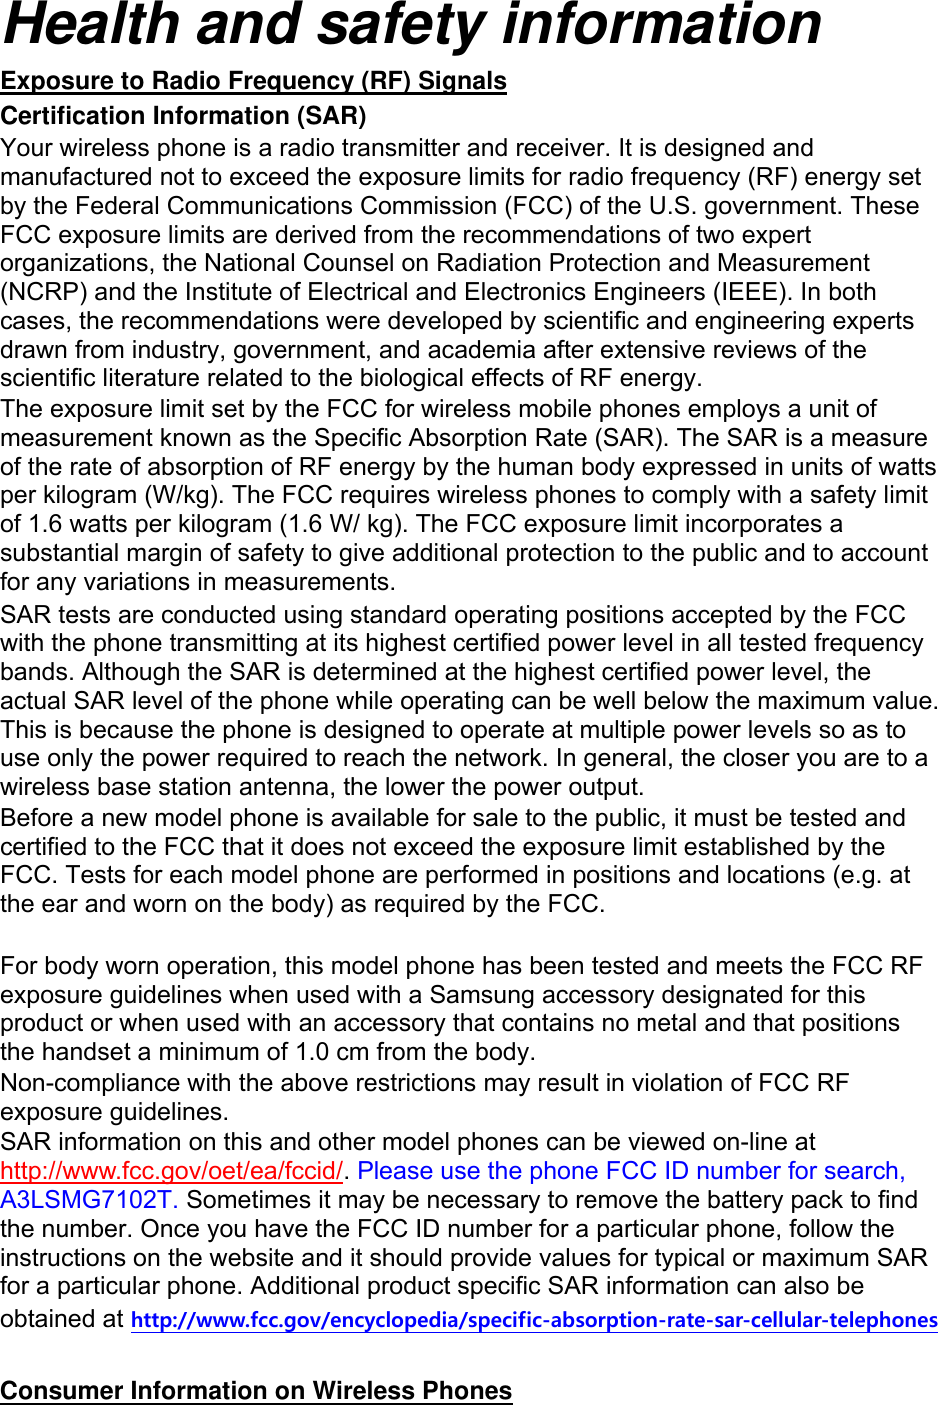 Health and safety information Exposure to Radio Frequency (RF) Signals Certification Information (SAR) Your wireless phone is a radio transmitter and receiver. It is designed and manufactured not to exceed the exposure limits for radio frequency (RF) energy set by the Federal Communications Commission (FCC) of the U.S. government. These FCC exposure limits are derived from the recommendations of two expert organizations, the National Counsel on Radiation Protection and Measurement (NCRP) and the Institute of Electrical and Electronics Engineers (IEEE). In both cases, the recommendations were developed by scientific and engineering experts drawn from industry, government, and academia after extensive reviews of the scientific literature related to the biological effects of RF energy. The exposure limit set by the FCC for wireless mobile phones employs a unit of measurement known as the Specific Absorption Rate (SAR). The SAR is a measure of the rate of absorption of RF energy by the human body expressed in units of watts per kilogram (W/kg). The FCC requires wireless phones to comply with a safety limit of 1.6 watts per kilogram (1.6 W/ kg). The FCC exposure limit incorporates a substantial margin of safety to give additional protection to the public and to account for any variations in measurements. SAR tests are conducted using standard operating positions accepted by the FCC with the phone transmitting at its highest certified power level in all tested frequency bands. Although the SAR is determined at the highest certified power level, the actual SAR level of the phone while operating can be well below the maximum value. This is because the phone is designed to operate at multiple power levels so as to use only the power required to reach the network. In general, the closer you are to a wireless base station antenna, the lower the power output. Before a new model phone is available for sale to the public, it must be tested and certified to the FCC that it does not exceed the exposure limit established by the FCC. Tests for each model phone are performed in positions and locations (e.g. at the ear and worn on the body) as required by the FCC.      For body worn operation, this model phone has been tested and meets the FCC RF exposure guidelines when used with a Samsung accessory designated for this product or when used with an accessory that contains no metal and that positions the handset a minimum of 1.0 cm from the body.   Non-compliance with the above restrictions may result in violation of FCC RF exposure guidelines. SAR information on this and other model phones can be viewed on-line at http://www.fcc.gov/oet/ea/fccid/. Please use the phone FCC ID number for search, A3LSMG7102T. Sometimes it may be necessary to remove the battery pack to find the number. Once you have the FCC ID number for a particular phone, follow the instructions on the website and it should provide values for typical or maximum SAR for a particular phone. Additional product specific SAR information can also be obtained at http://www.fcc.gov/encyclopedia/specific-absorption-rate-sar-cellular-telephones  Consumer Information on Wireless Phones 